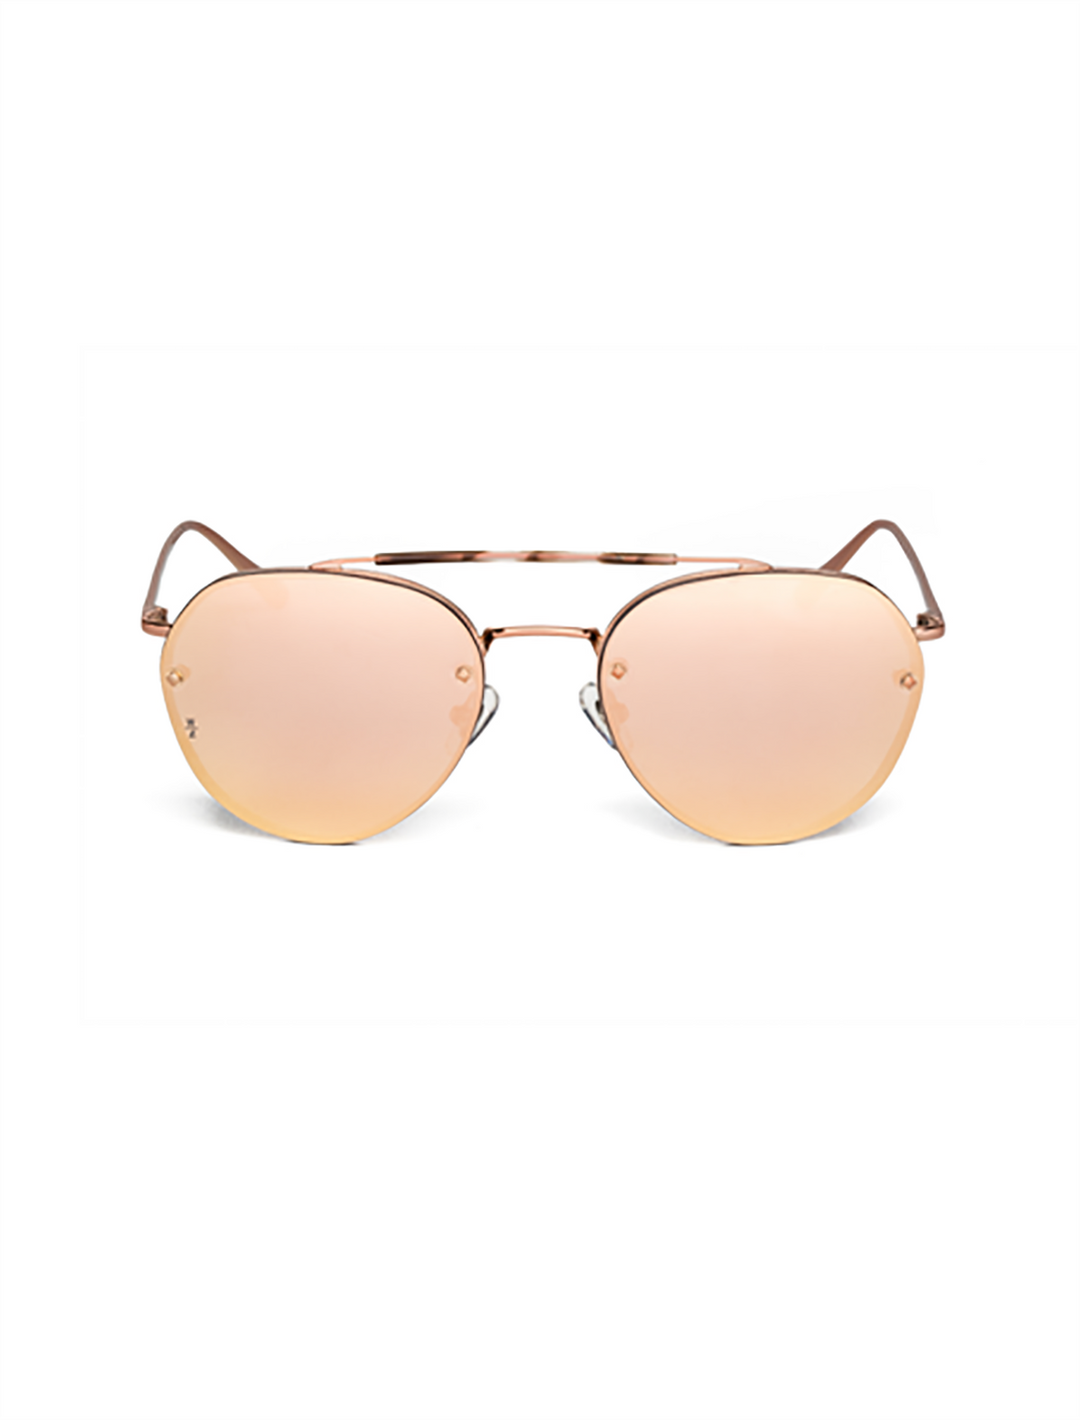 victorville in rose gold and rose gold cz lenses